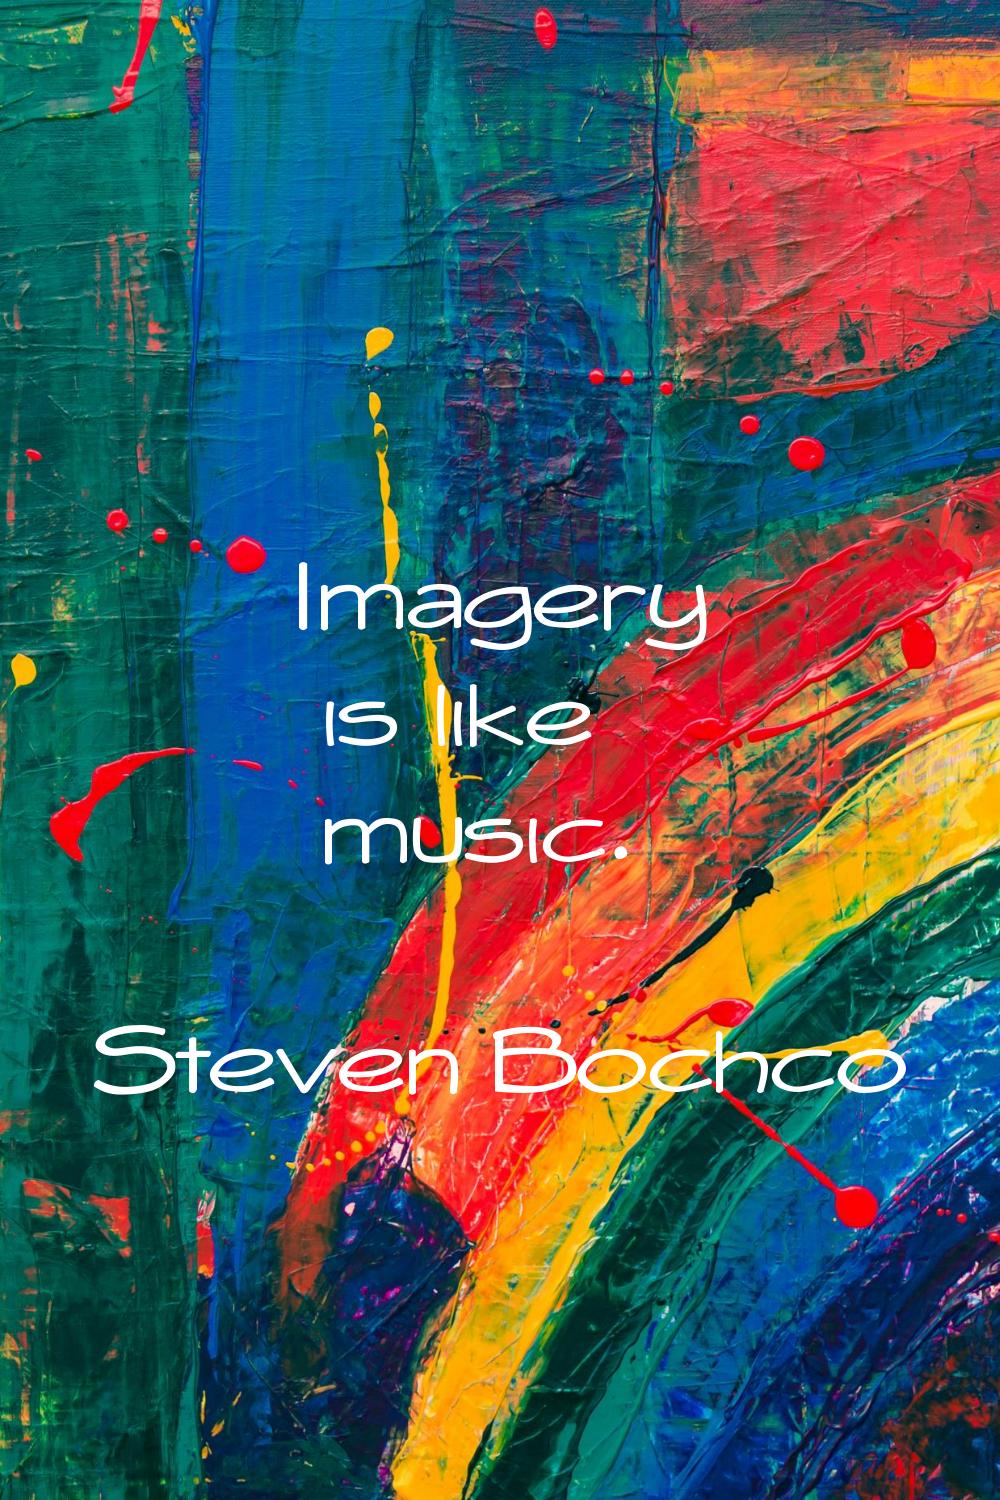 Imagery is like music.